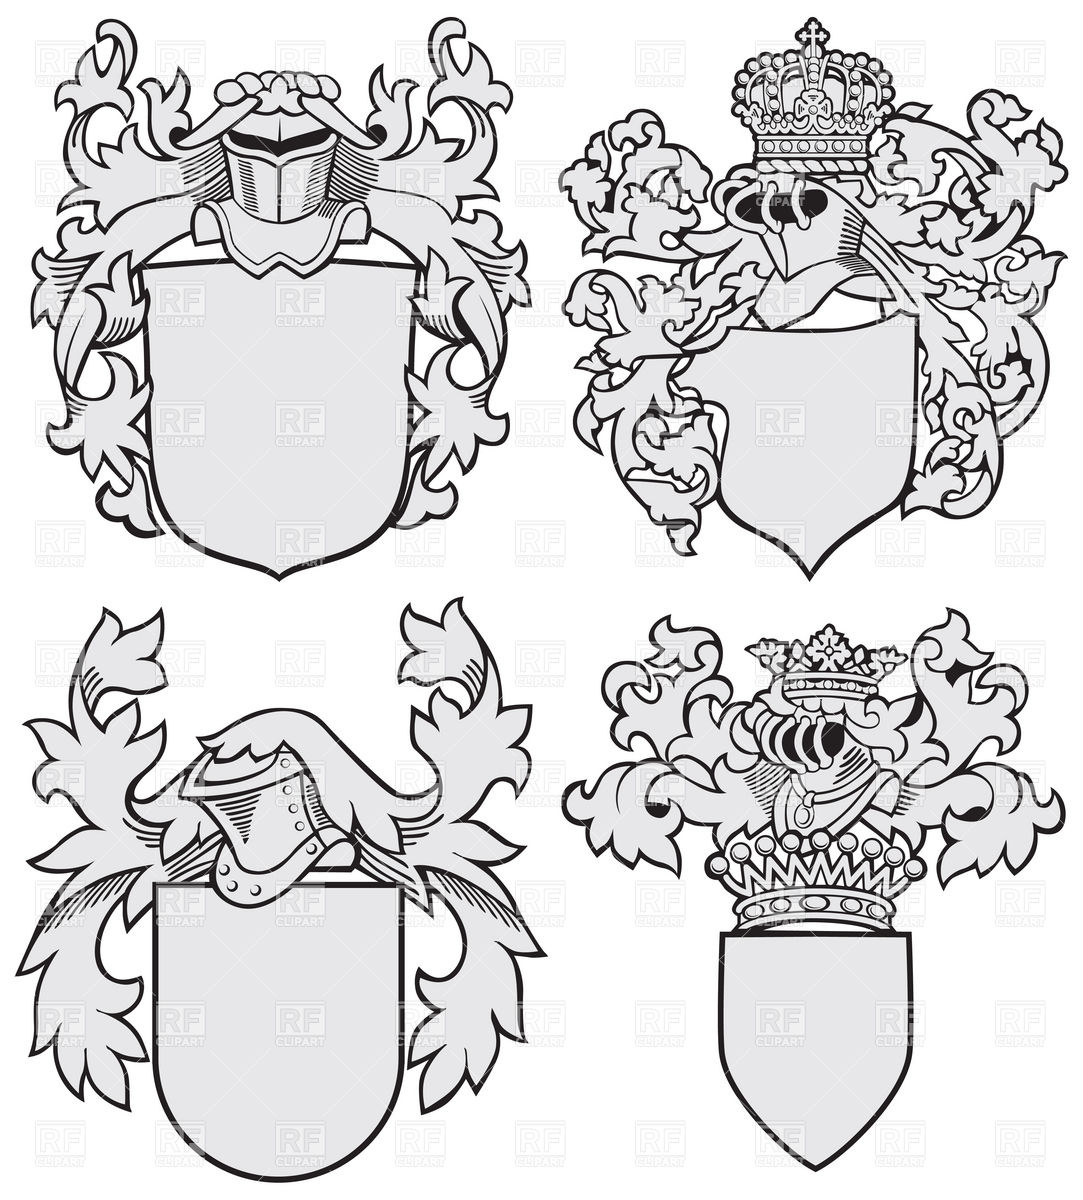 coat-of-arms-template-printable-pdf-download